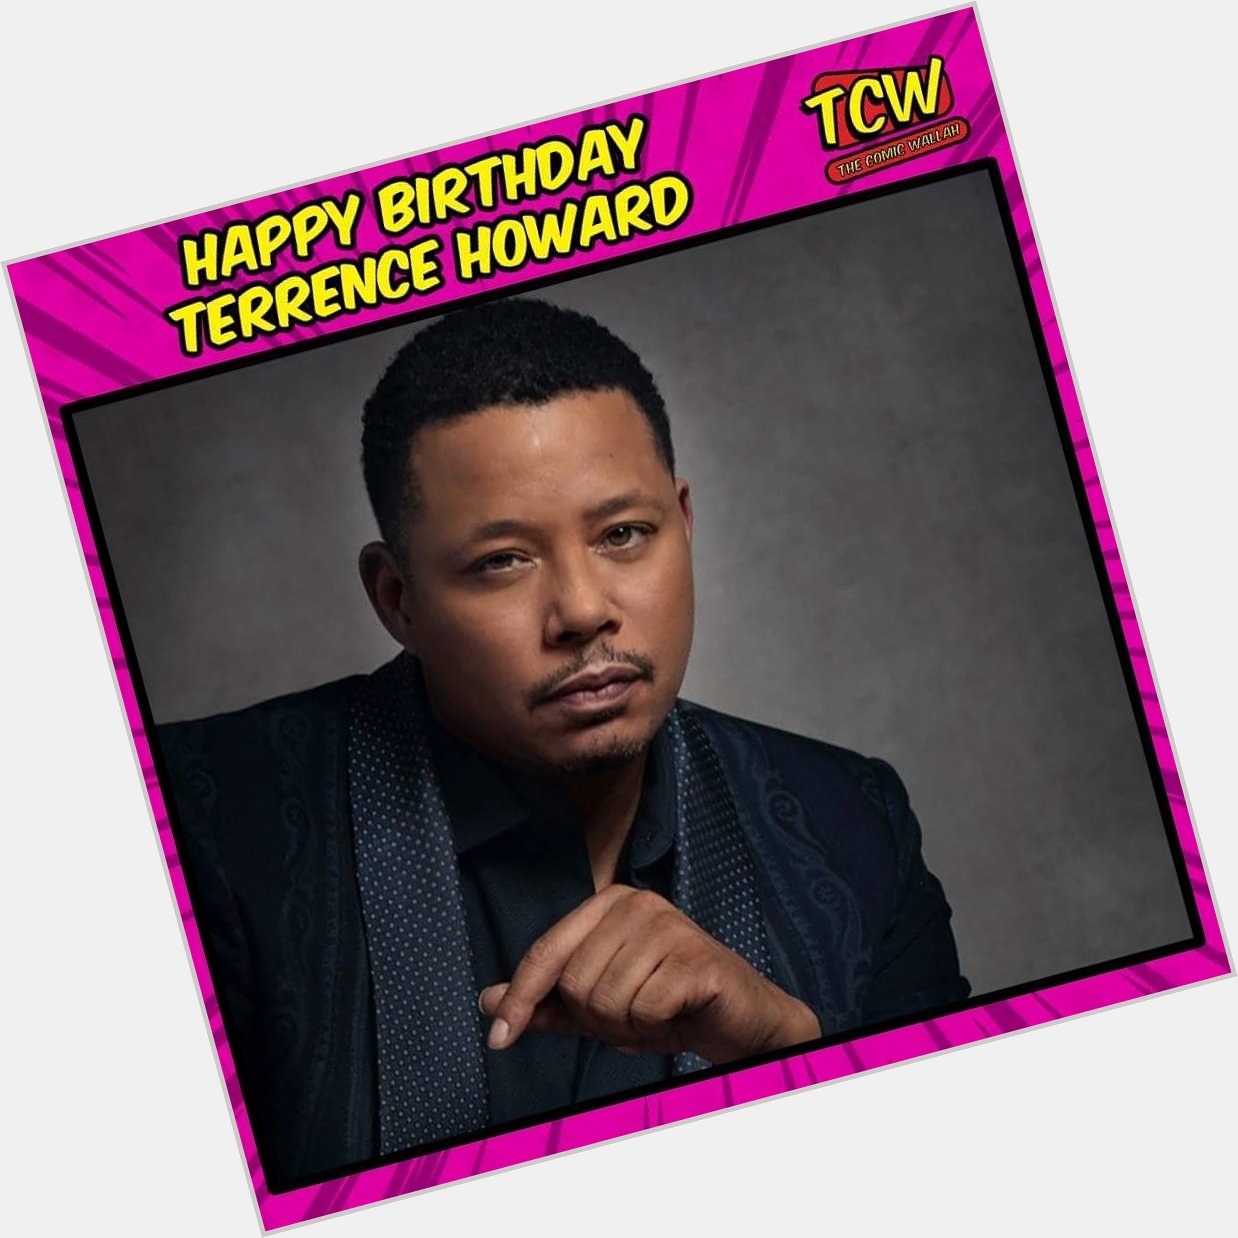 Wishing the talented Hollywood actor Terrence Howard a very happy birthday 